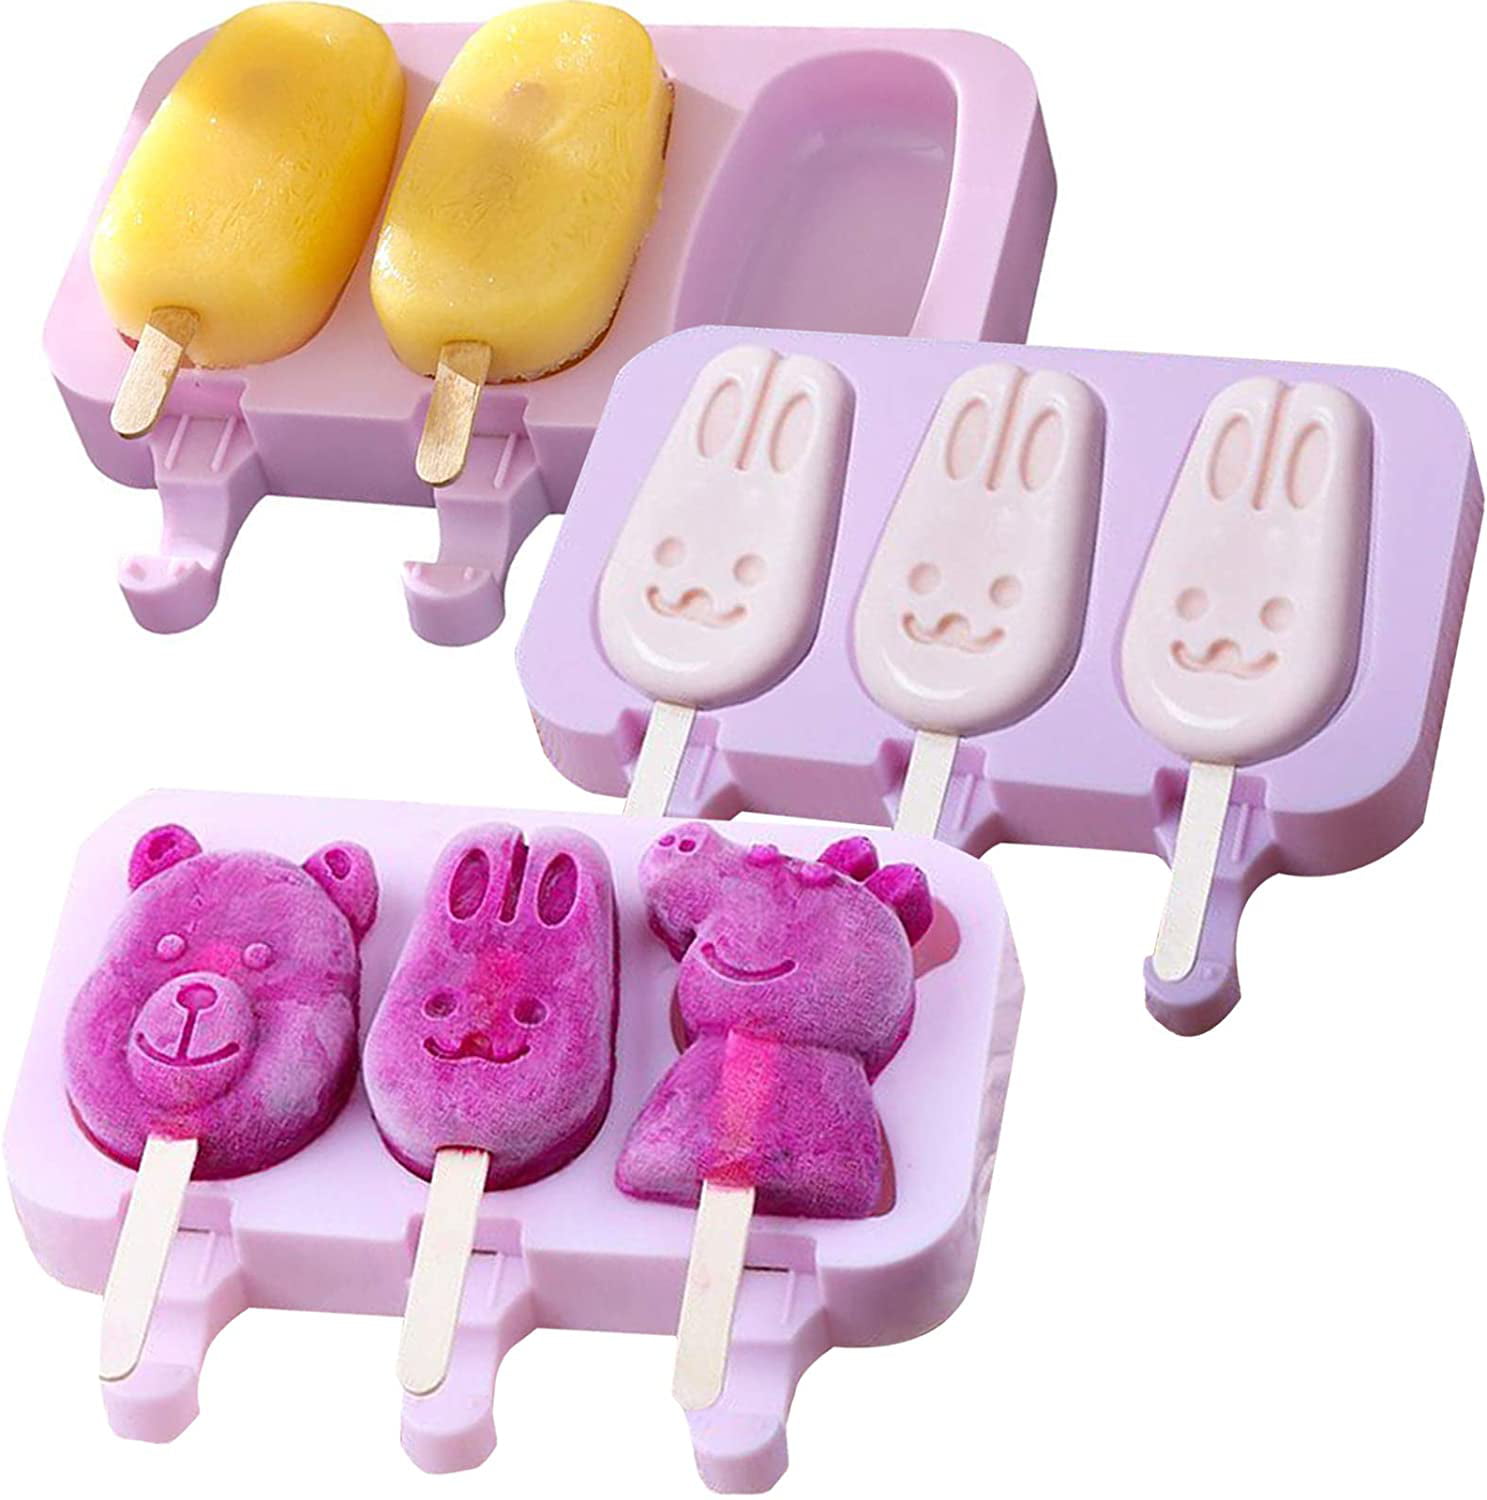 7Hole Silicone Frozen Ice Cream Mold Frozen Yogurt Popsicle Maker Lolly Mould